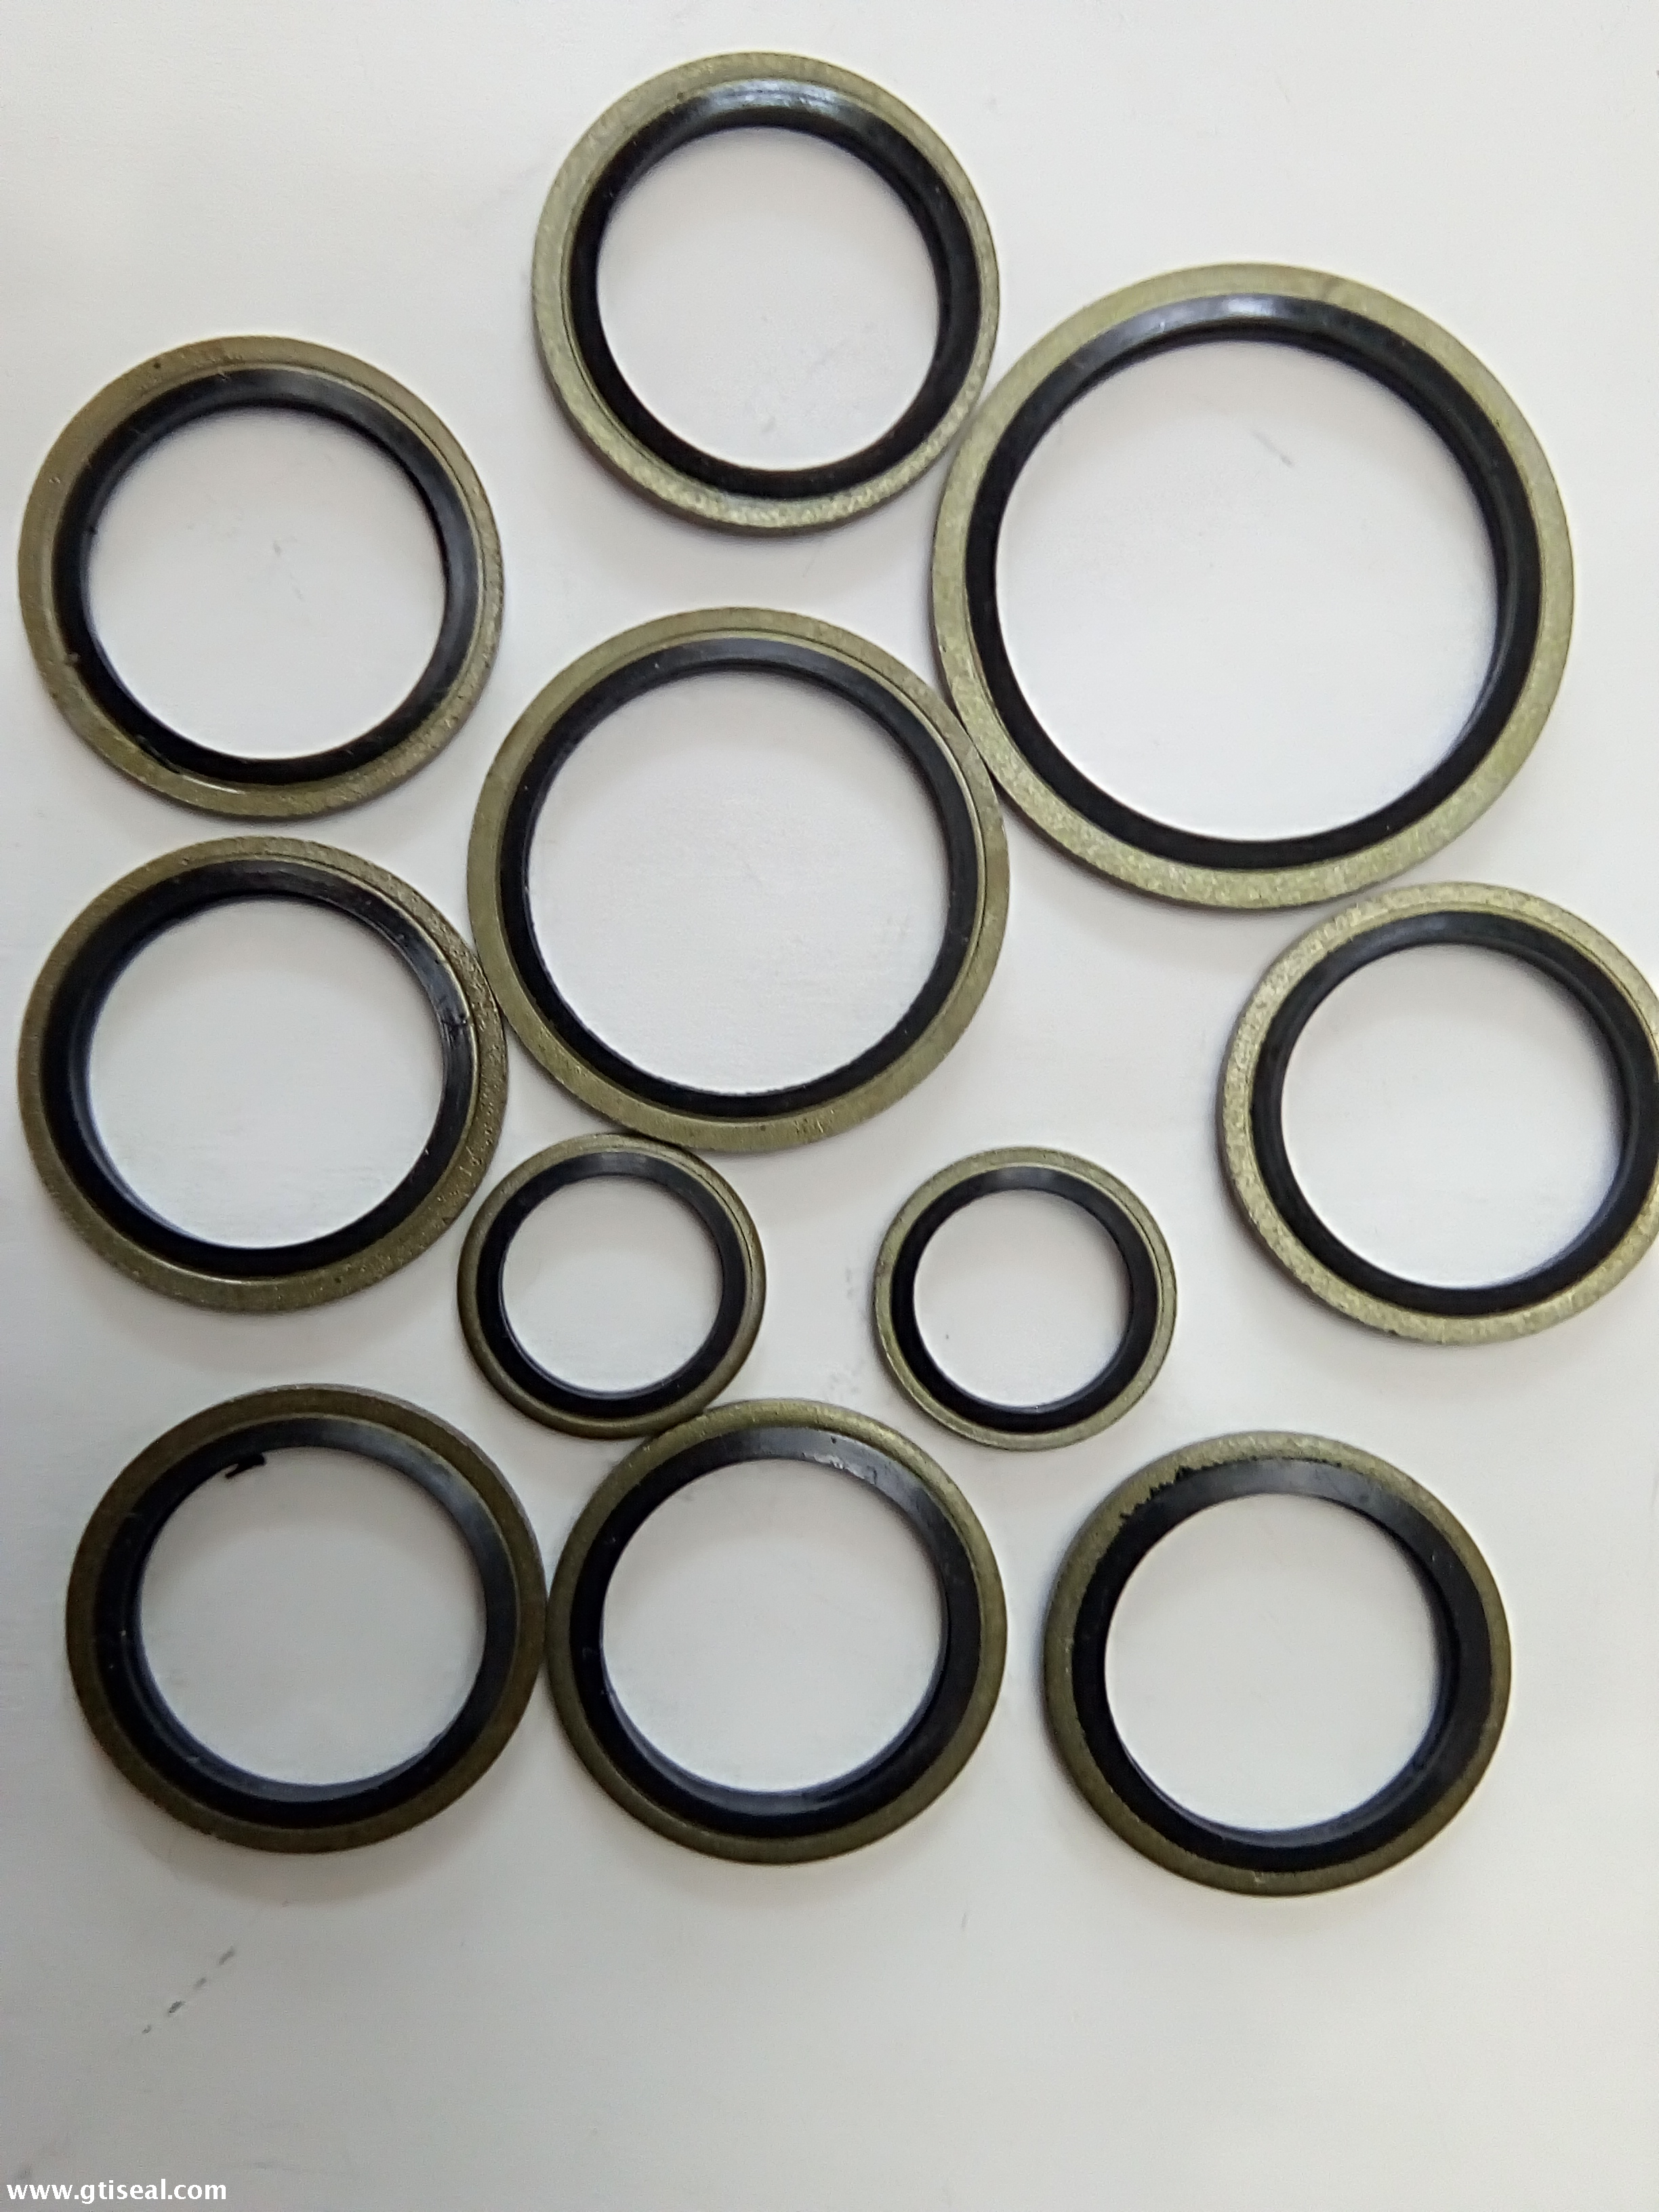  High Quality Self-center Bsp Bonded Seal/bonded Washer/sealing Washer Made in China 